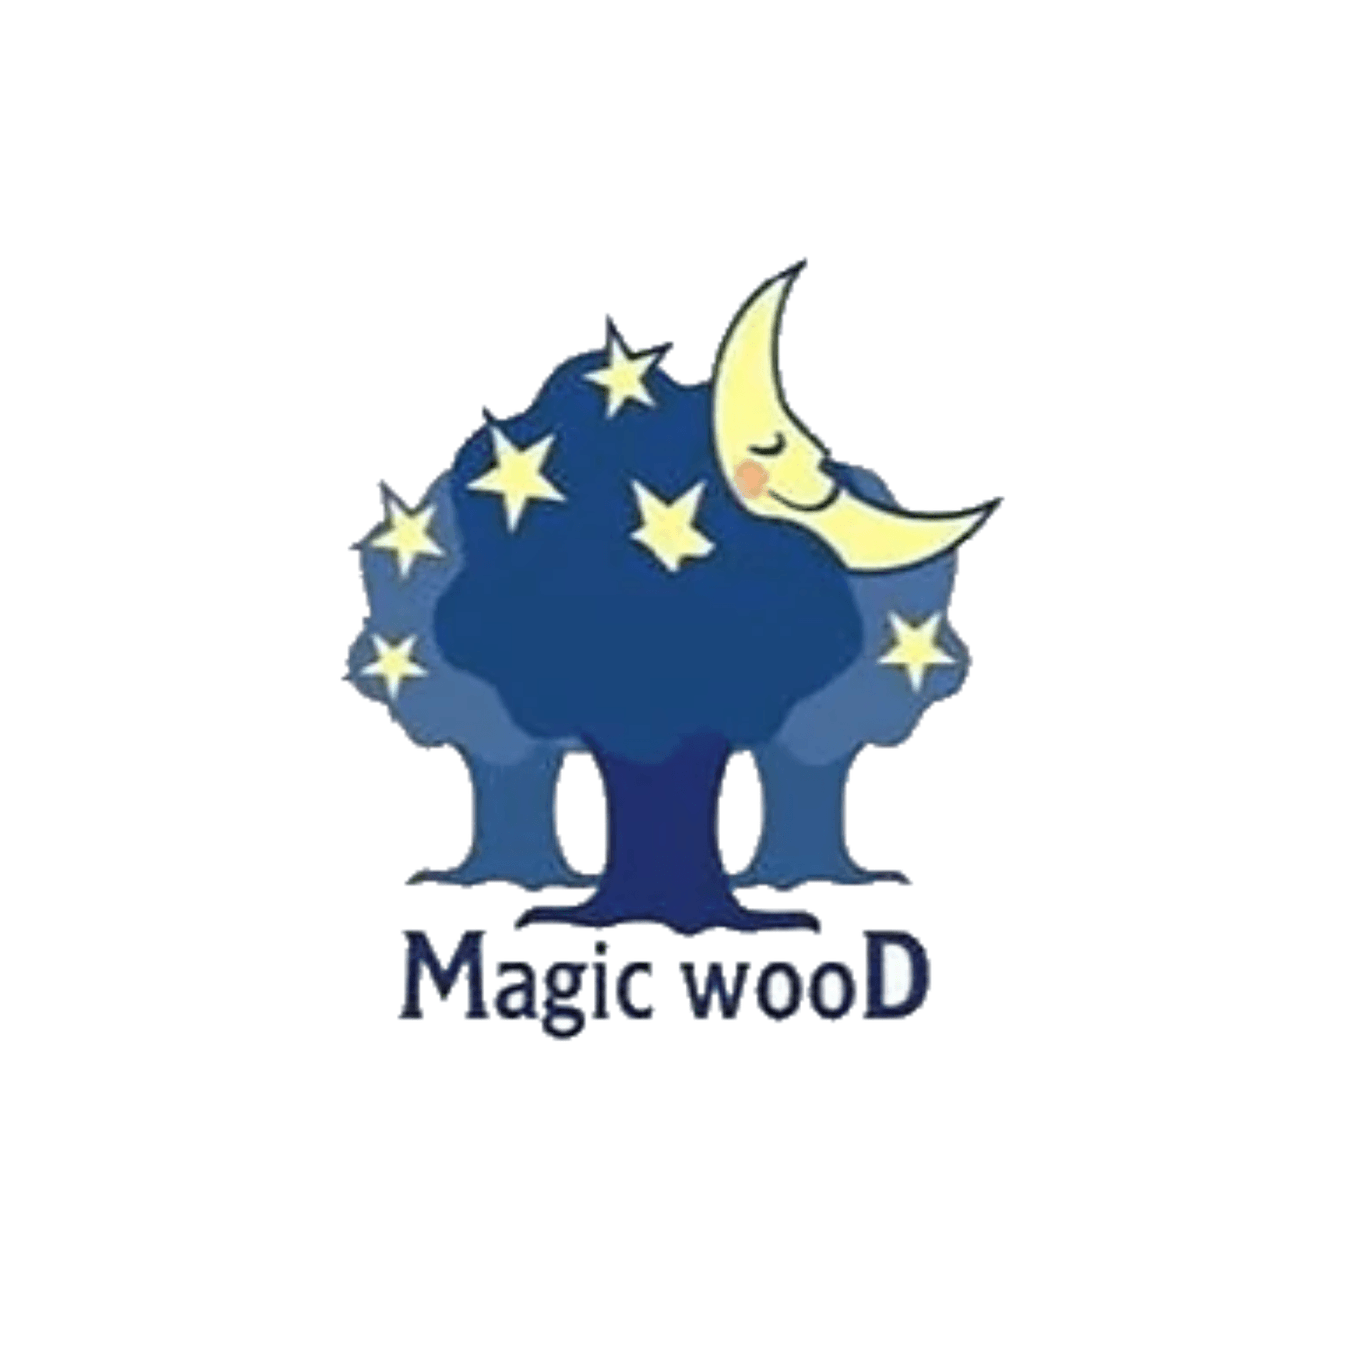 Featured - Magic Wood Wooden Toys Poland - My Playroom 